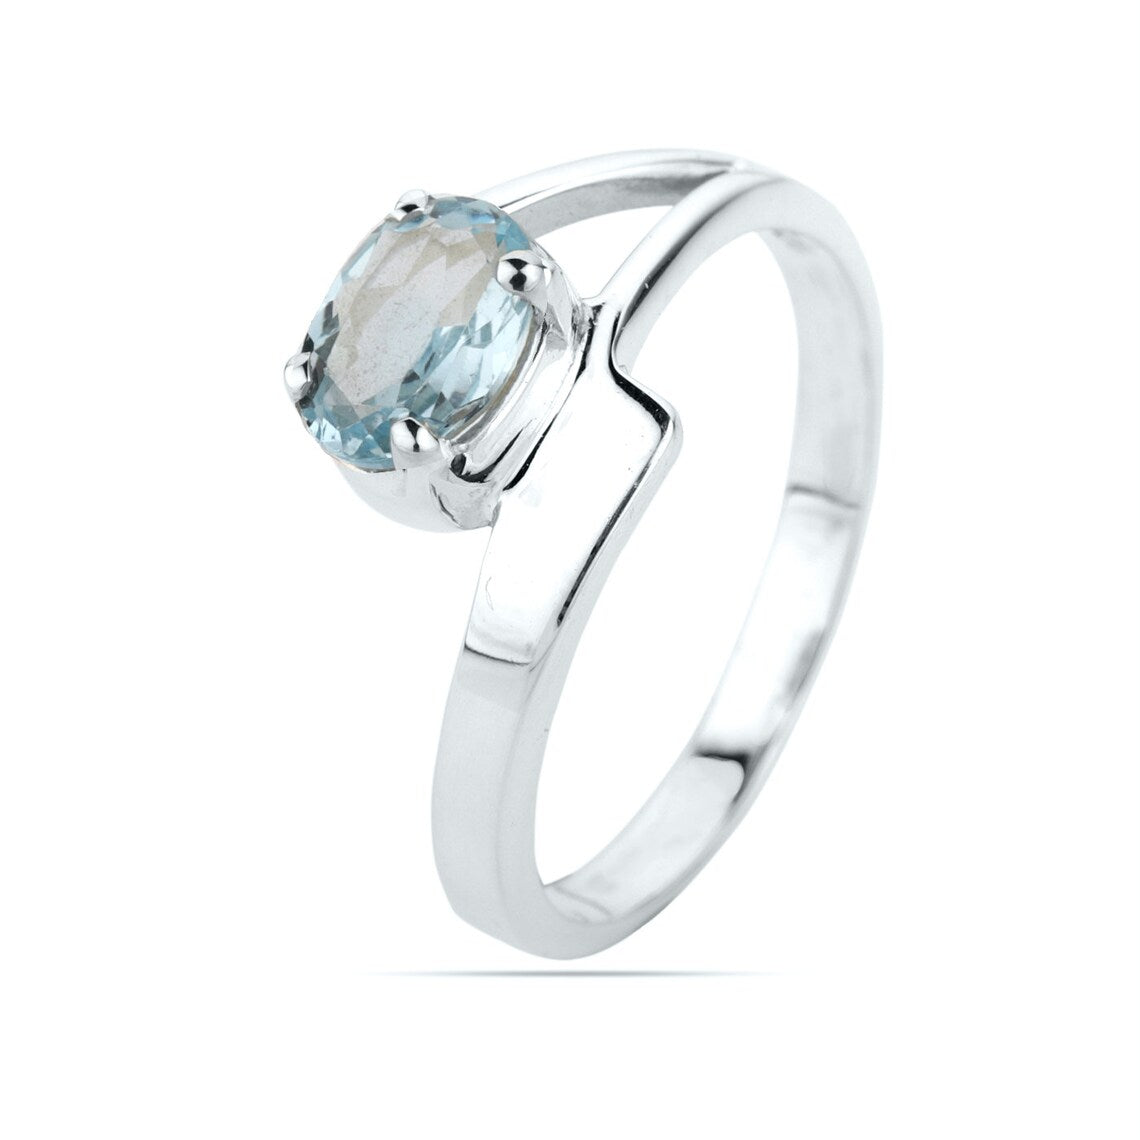 Natural Blue Topaz Oval Ring,Sterling Silver Blue Topaz Oval Ring